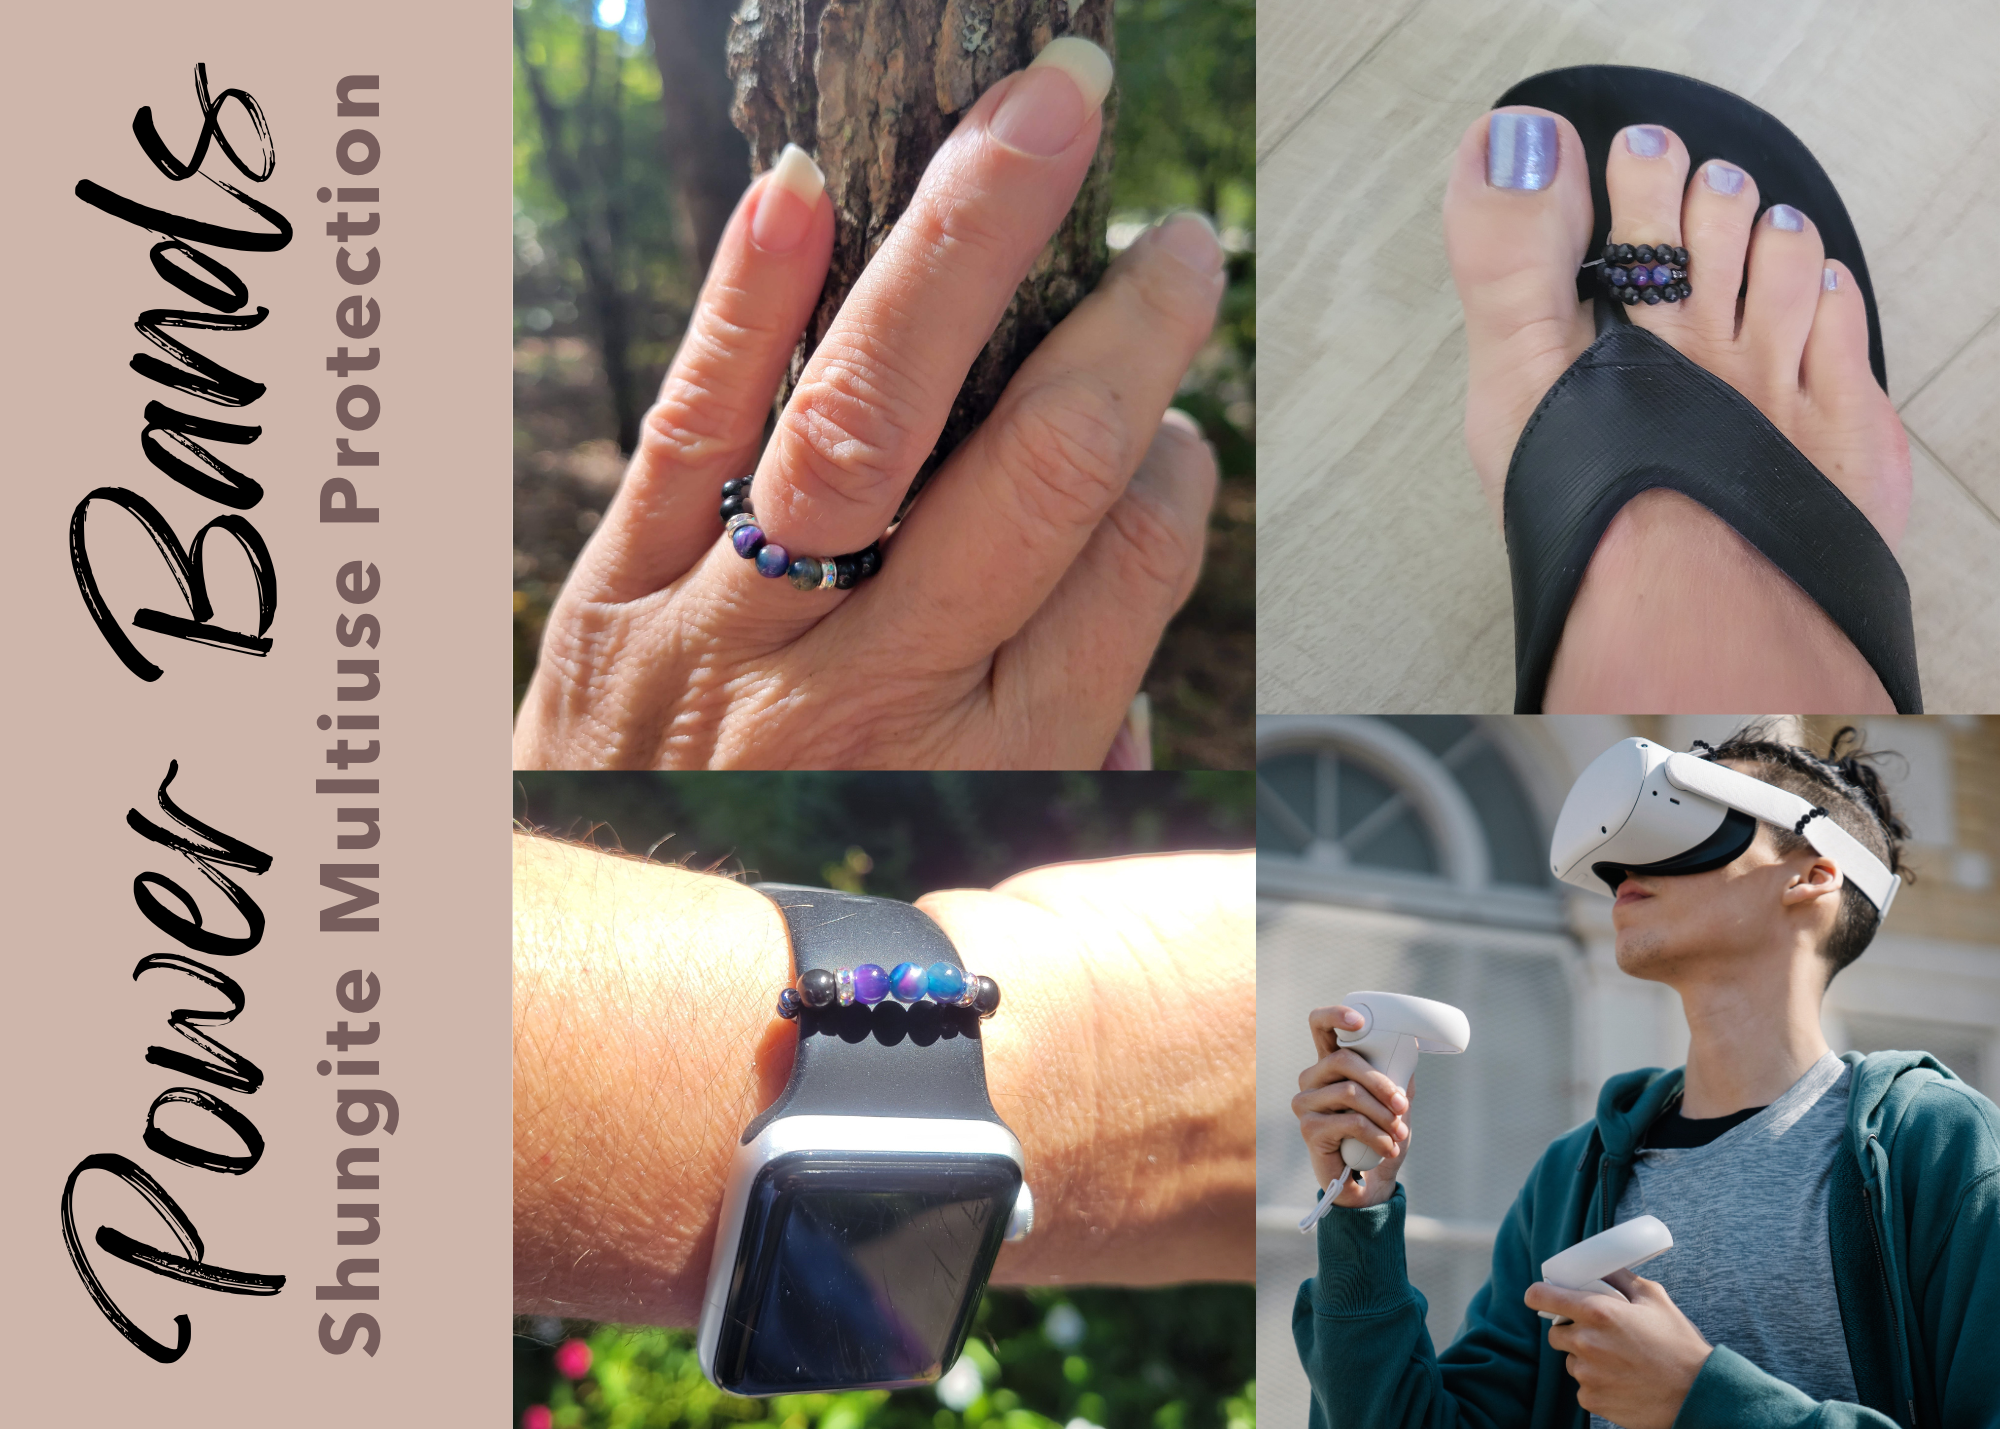 Shungite Power Rings for Jewelry, Smart Watches, Oculus and Smart Rings